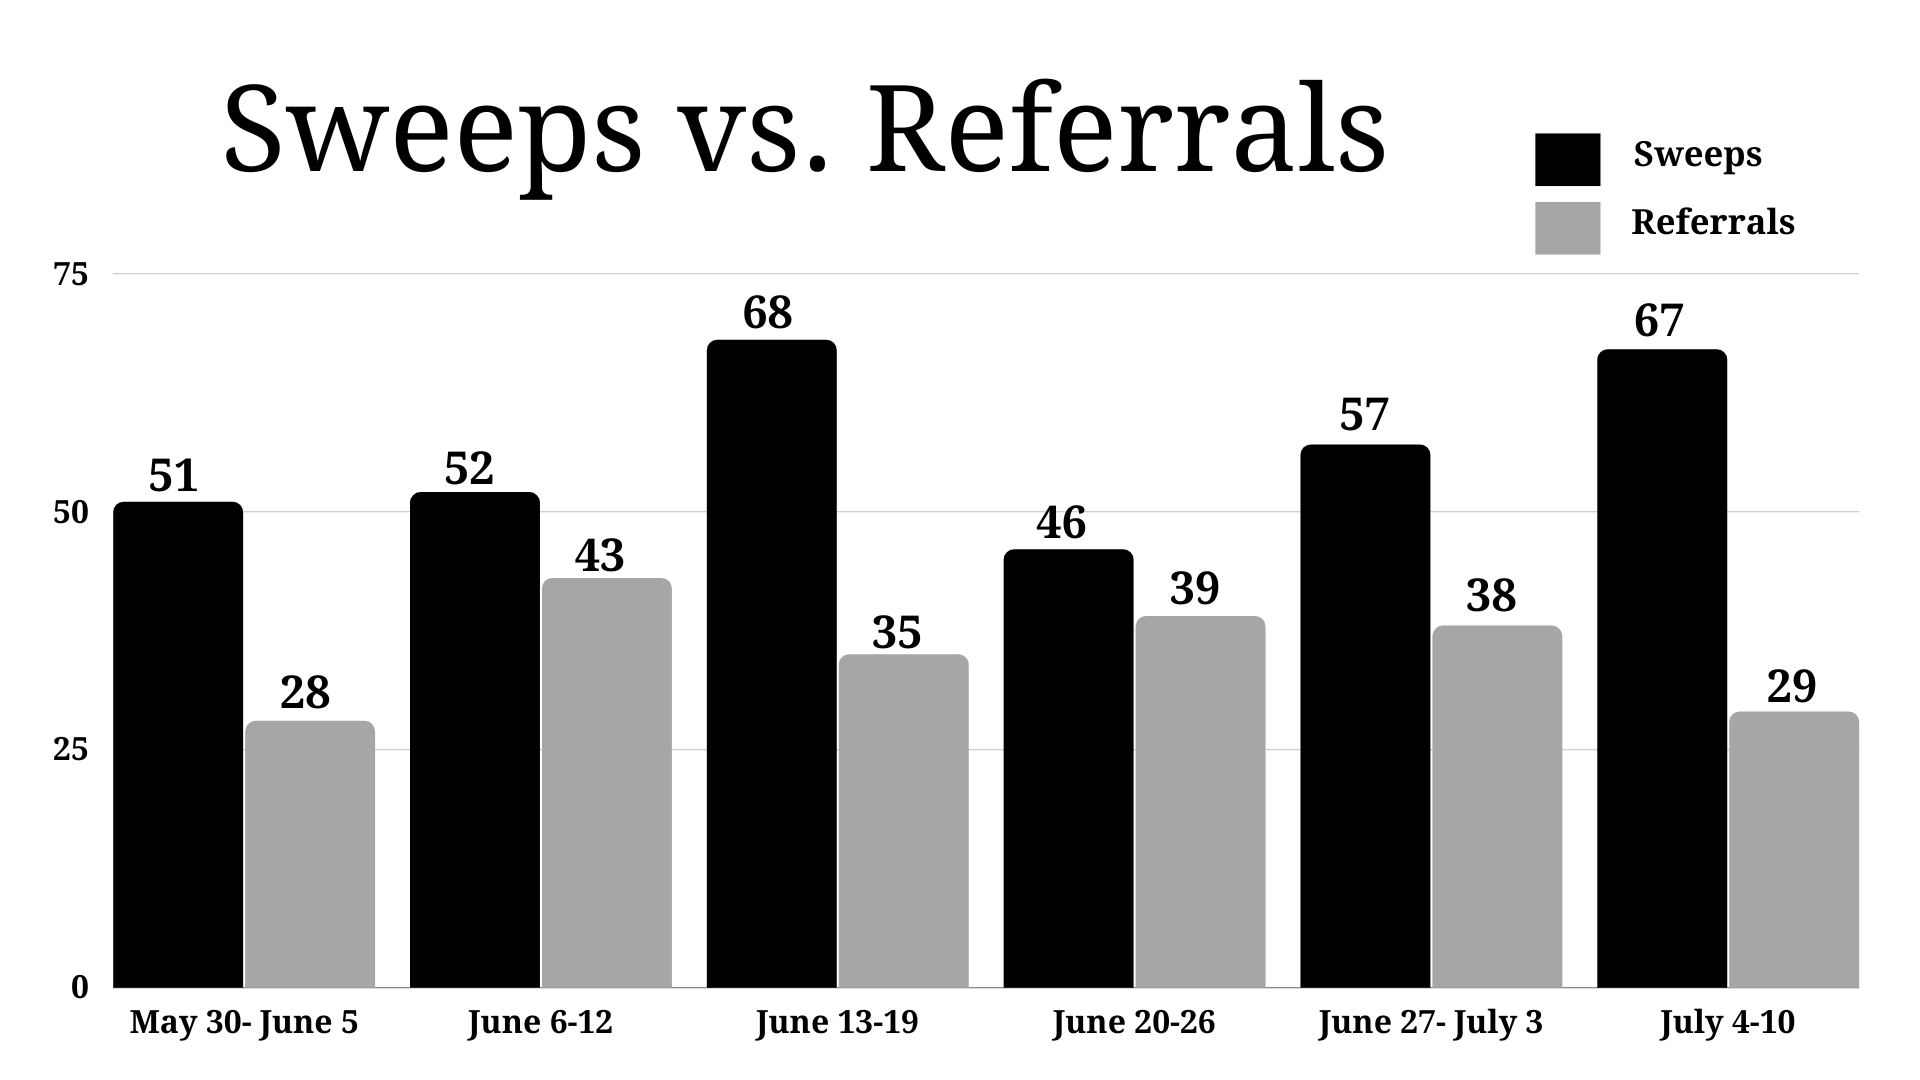 A bar chart titled “Sweeps vs referrals” shows the amount of sweeps that occur (signified by a black bar) and the amount of referrals that occur (signified by a gray bar) in week long increments from May 30 up until July 10.